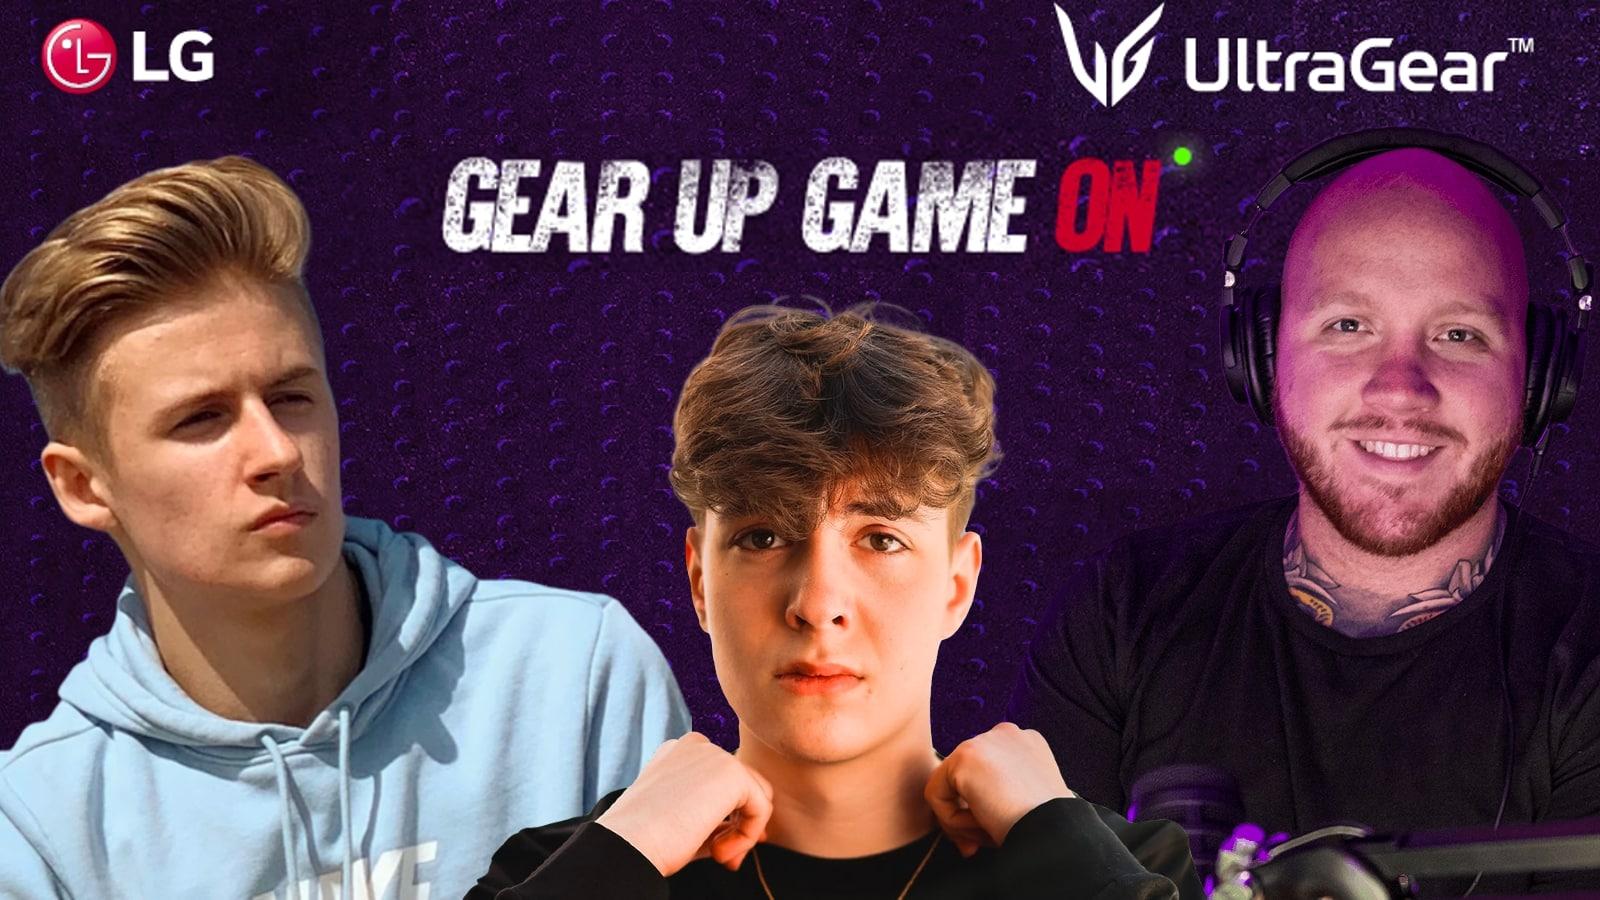 gear up game on promotional image